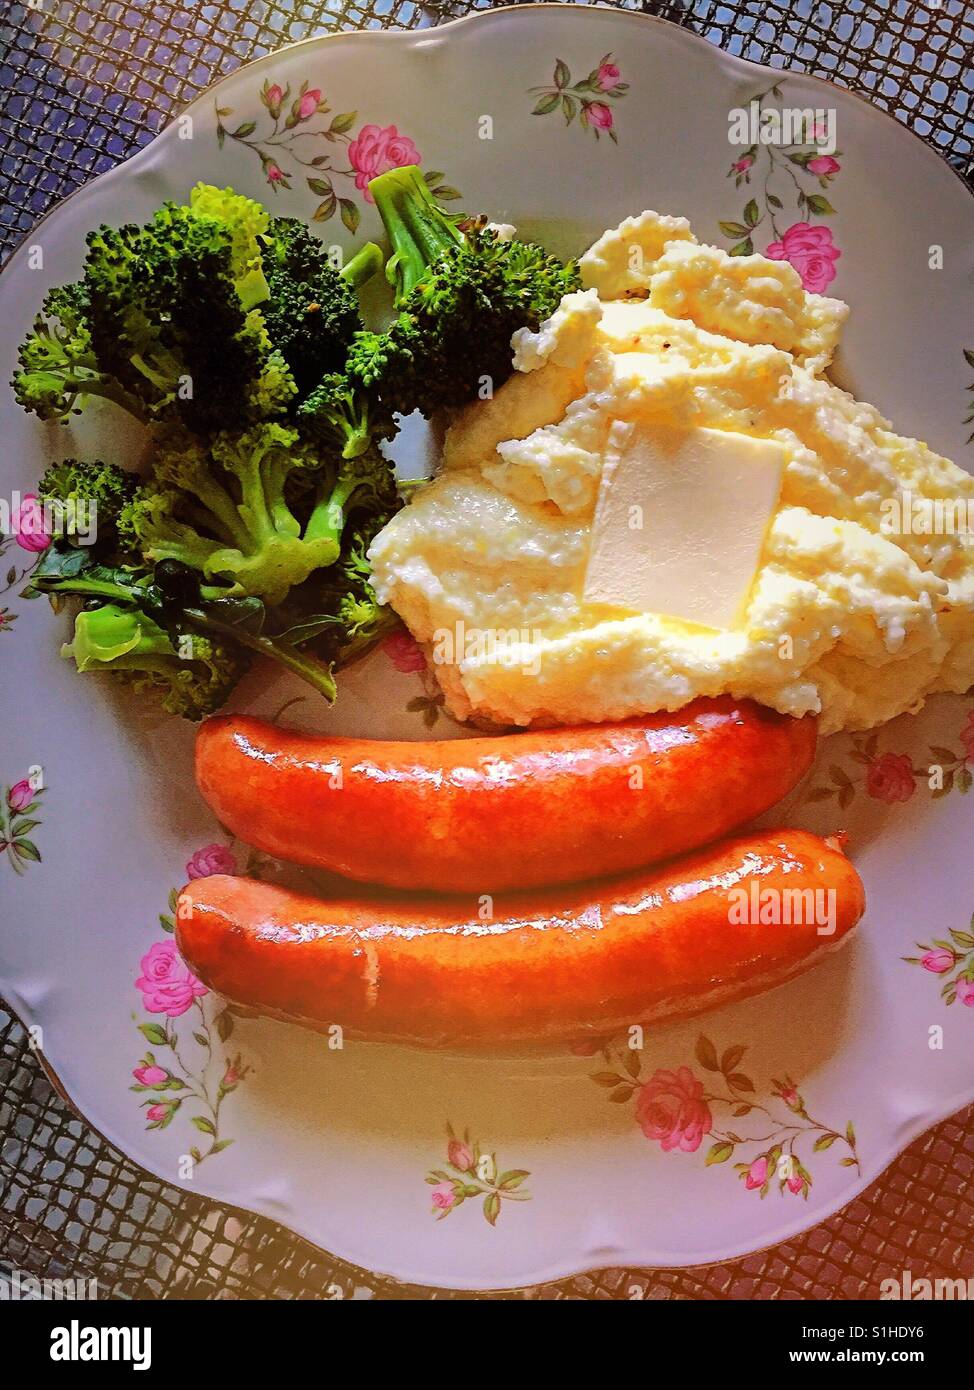 Hearty home cooked meal of sausages, grits and broccoli flowered  China plate, USA Stock Photo